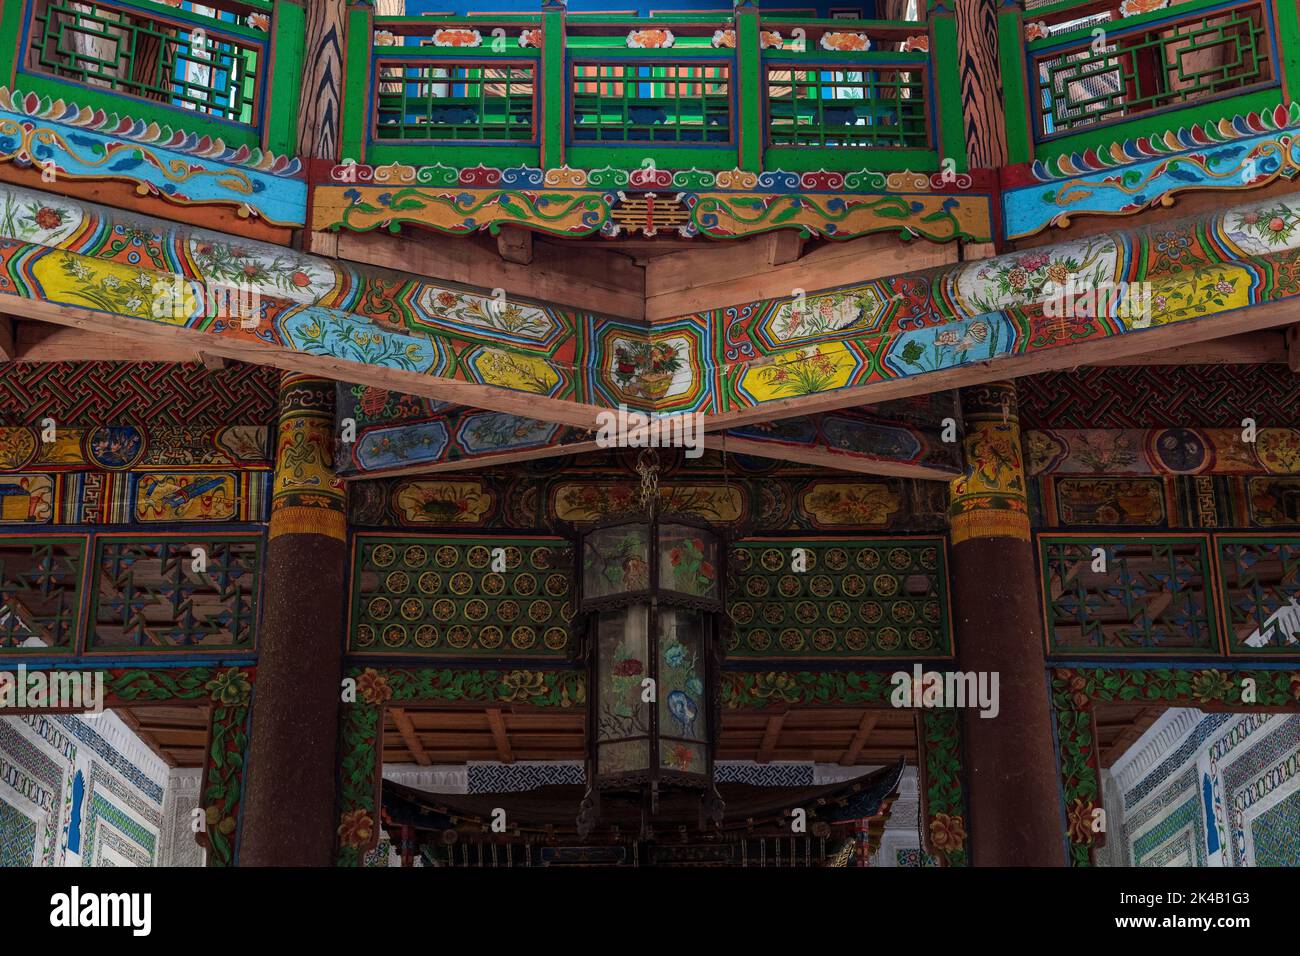 Colourful interior timber hall and structure of Chinese Dungan Uyghur Mosque in Zharkent, Kazakhstan Stock Photo